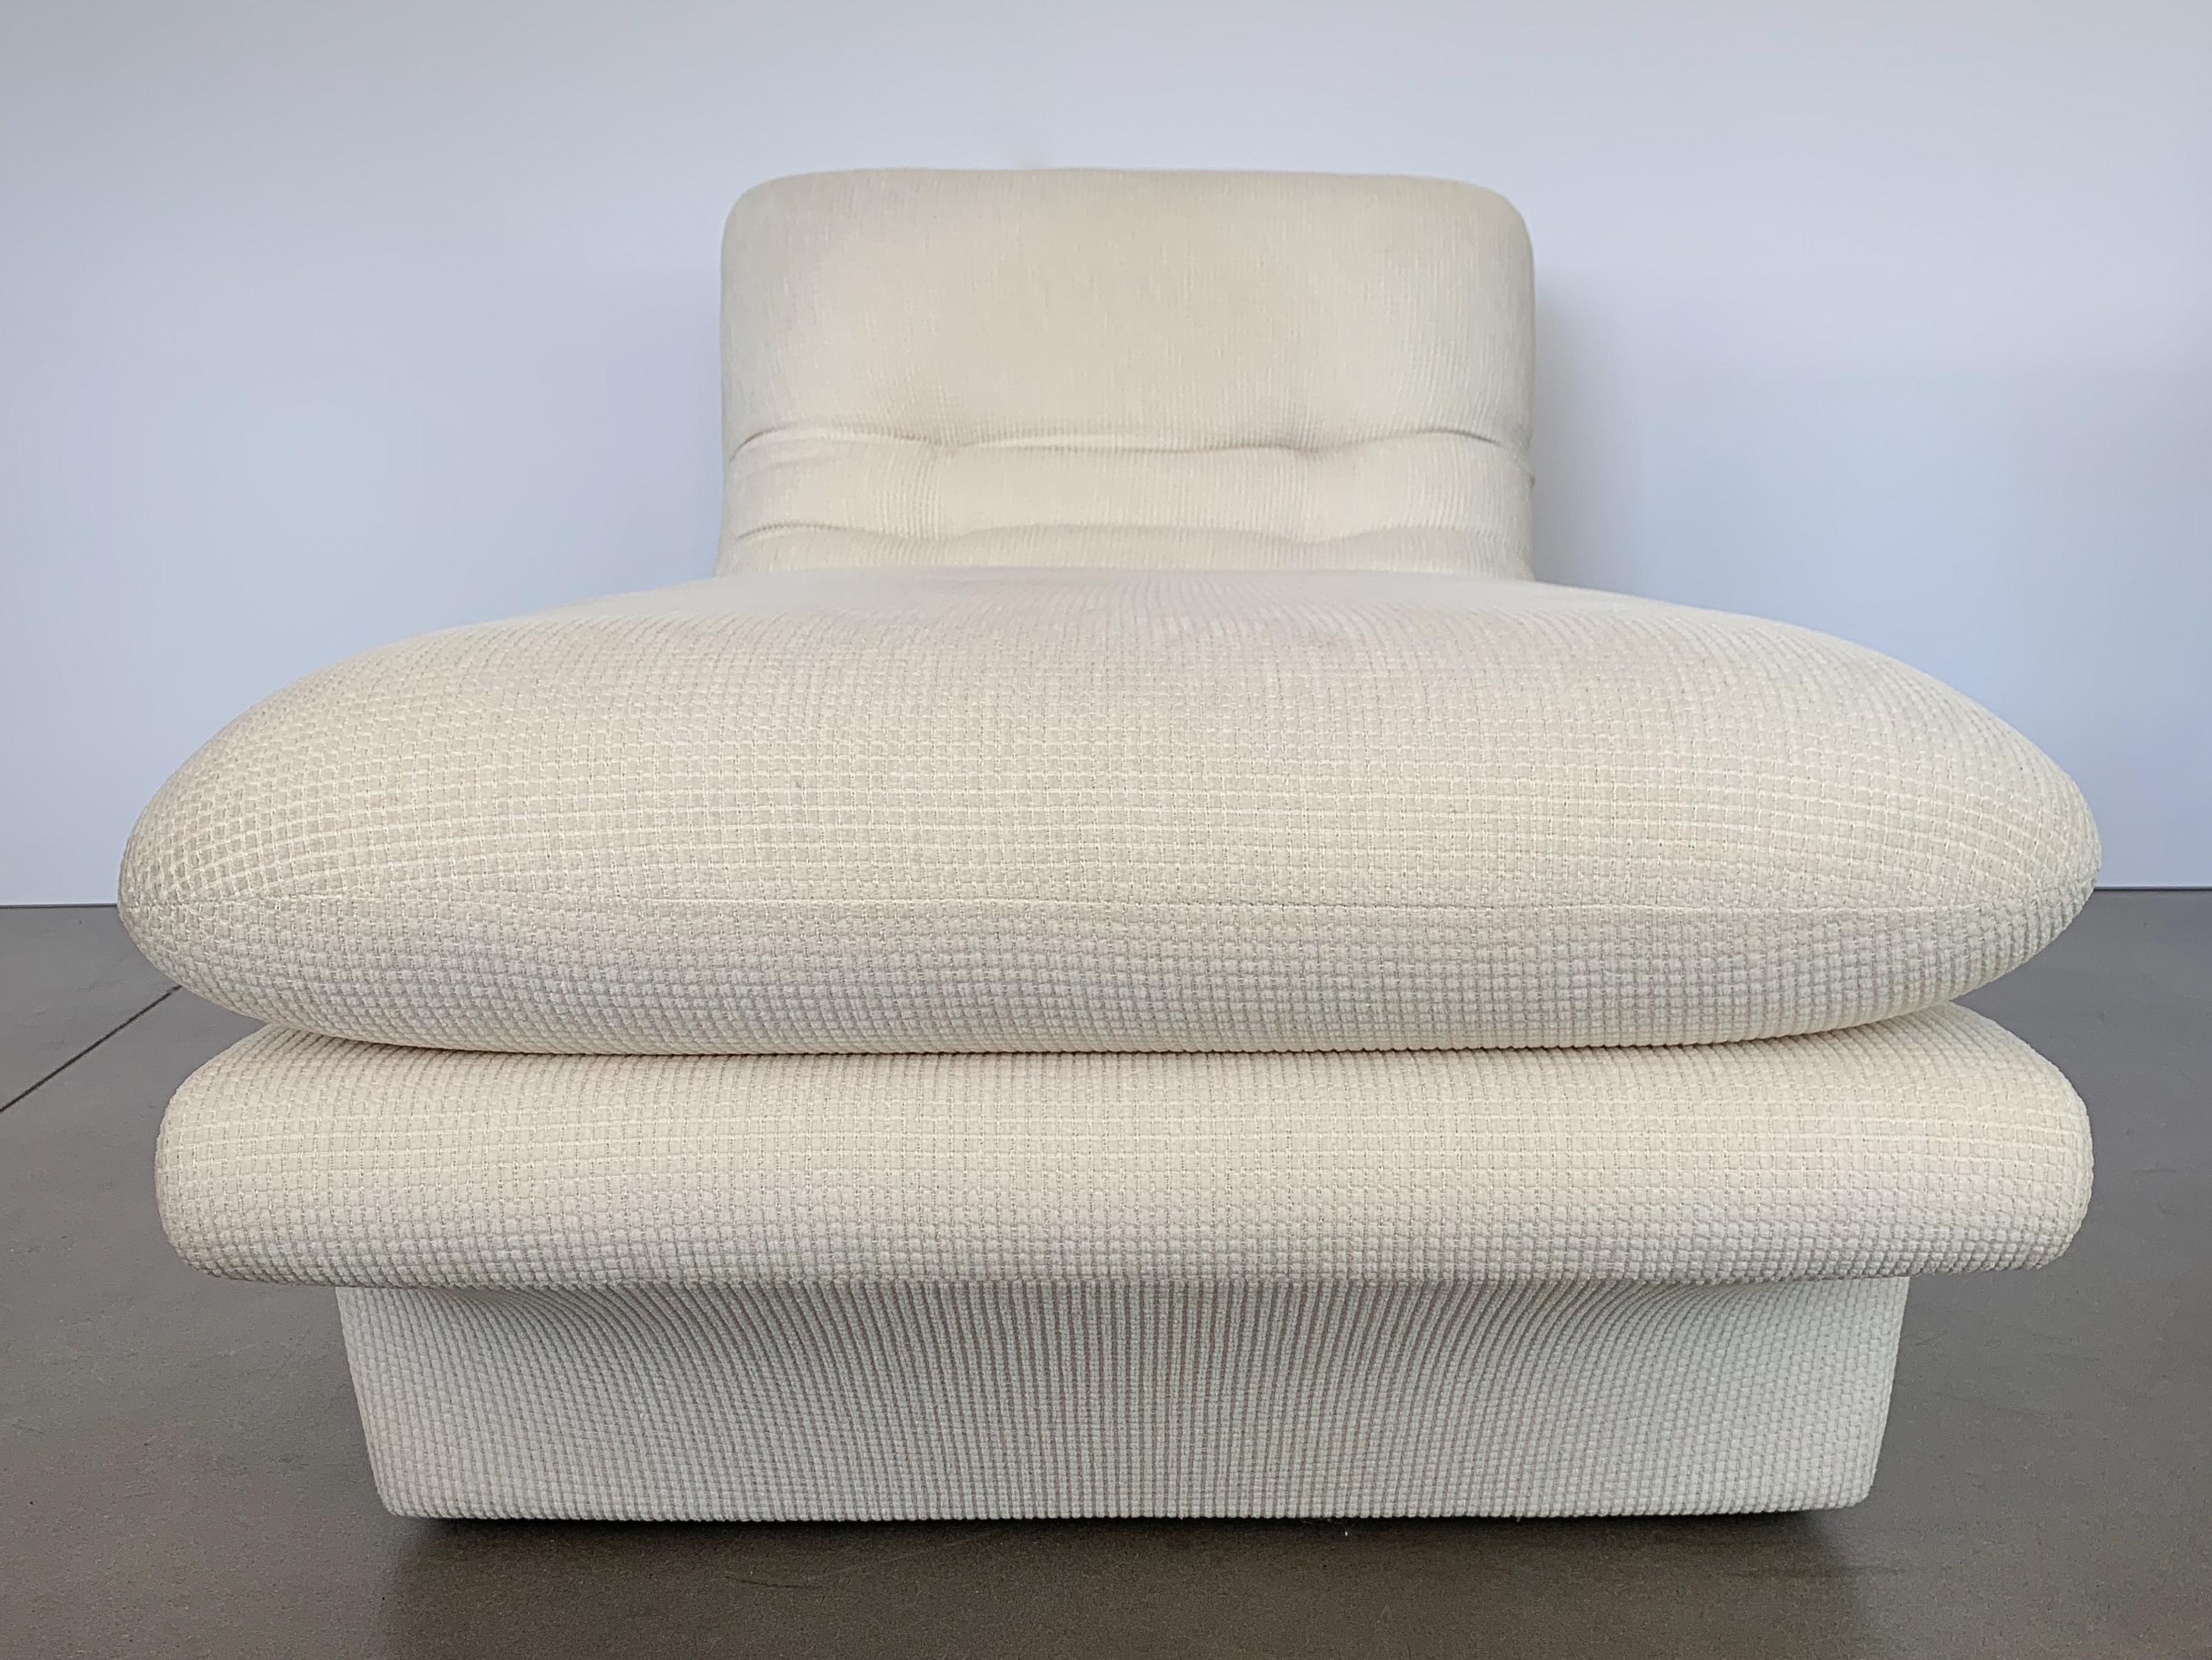 Modernist Fully Upholstered Chaise Lounge by Preview 1